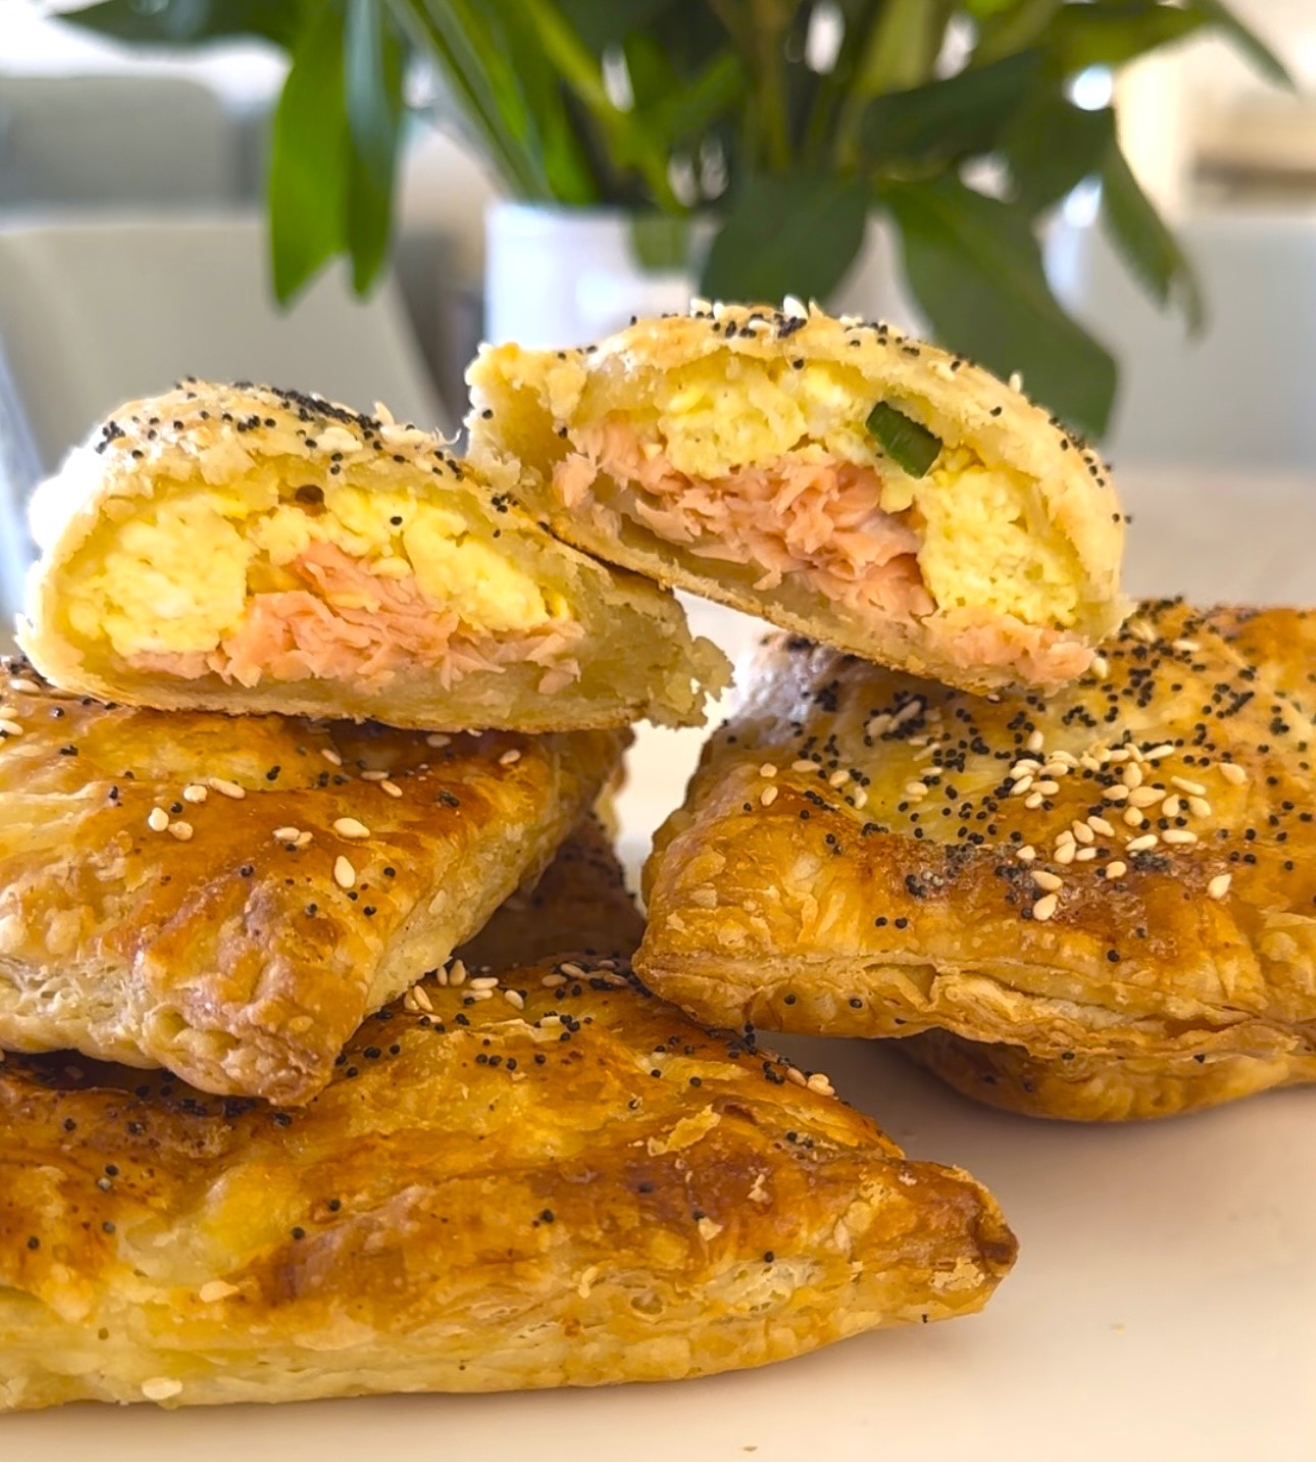 Stacked and open Breakfast egg Salmon Wellington, Salmon en Croute Pastry, is a warm, flaky puff pastry.